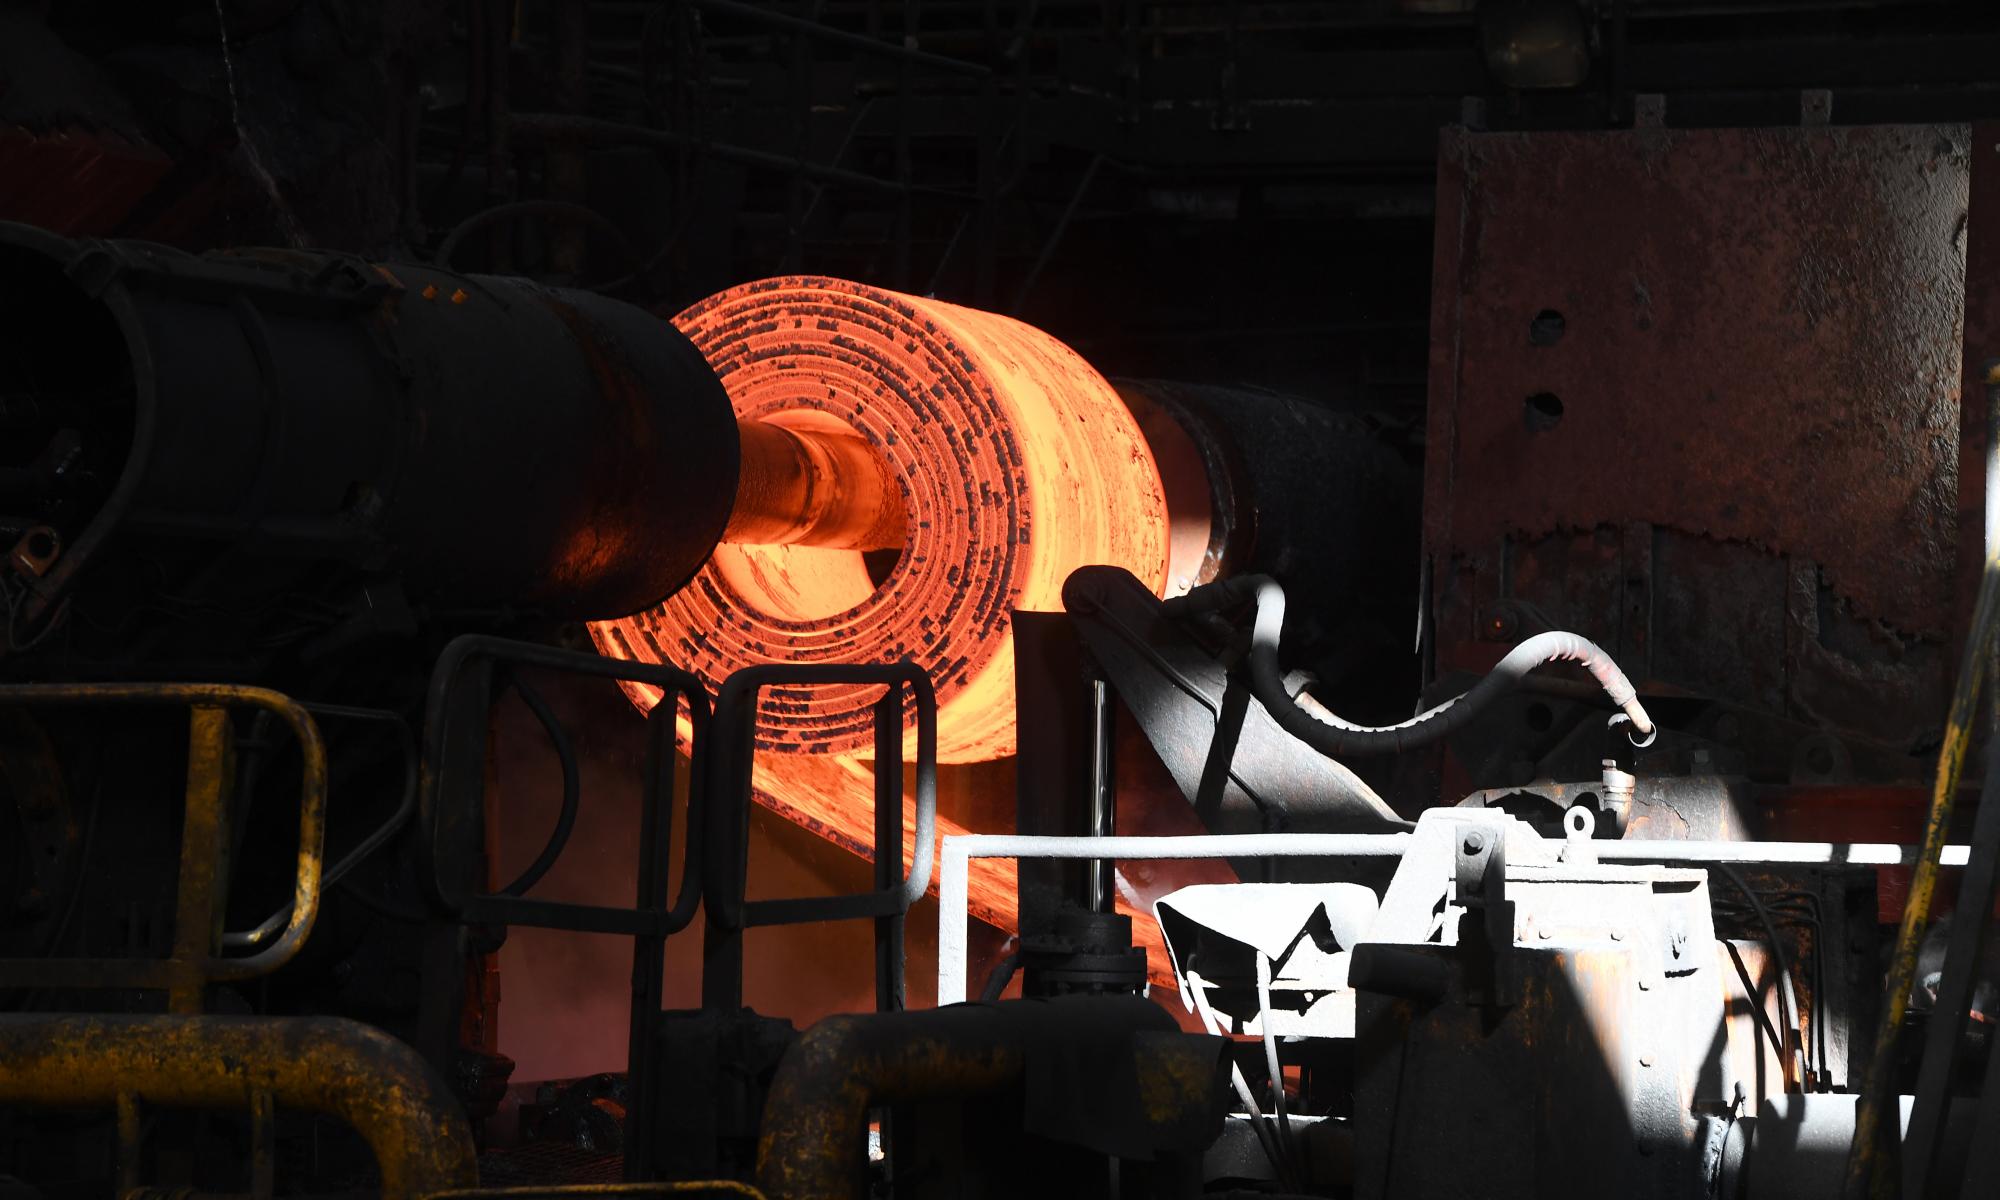 Green steel industry could secure jobs future for Australia's coalmining heartland